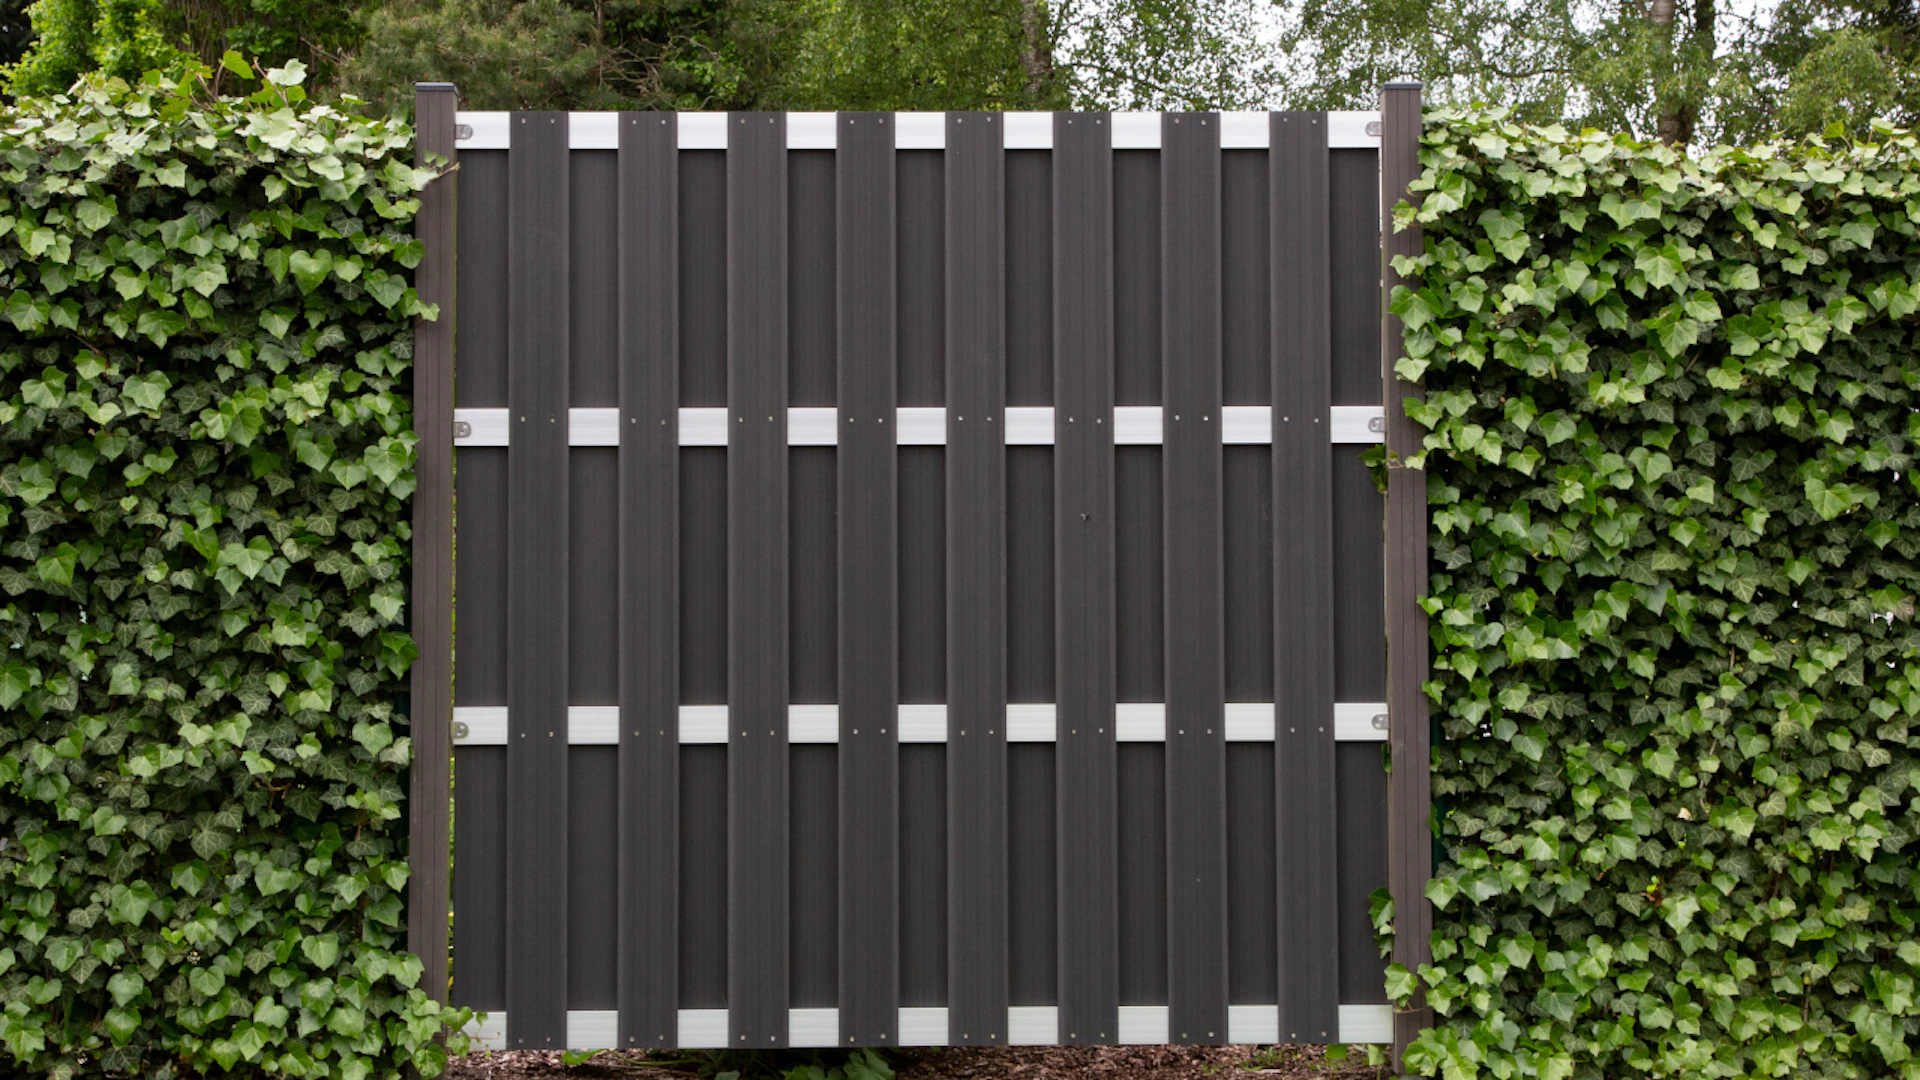 planeo prefabricated fence - square anthracite 180 x 180cm